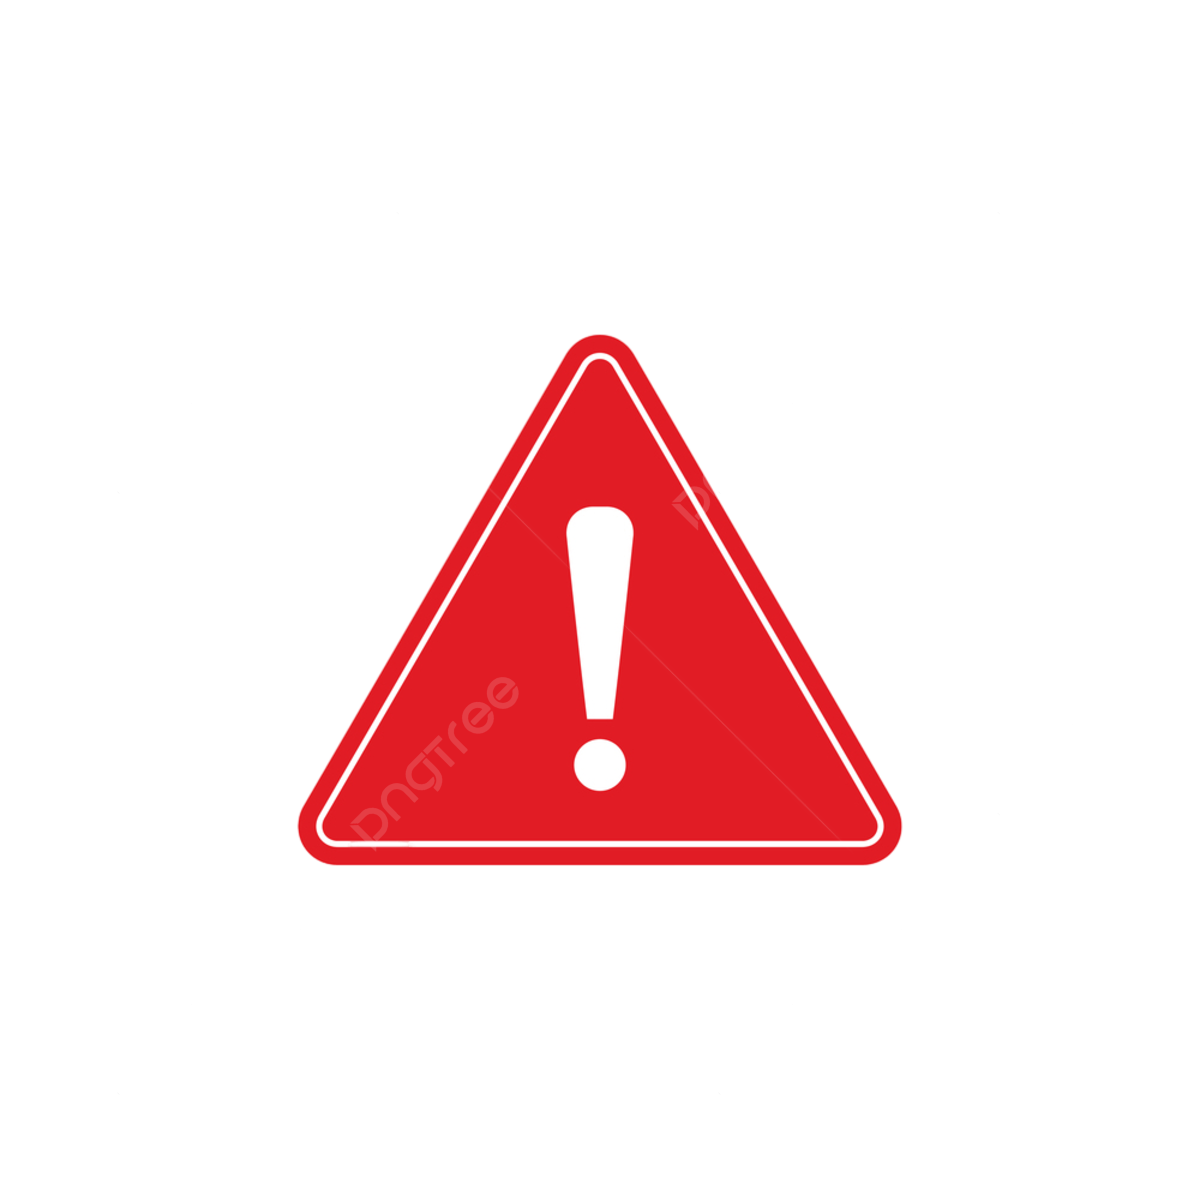 pngtree-danger-exclamation-sign-advice-alarm-picture-image_7945215